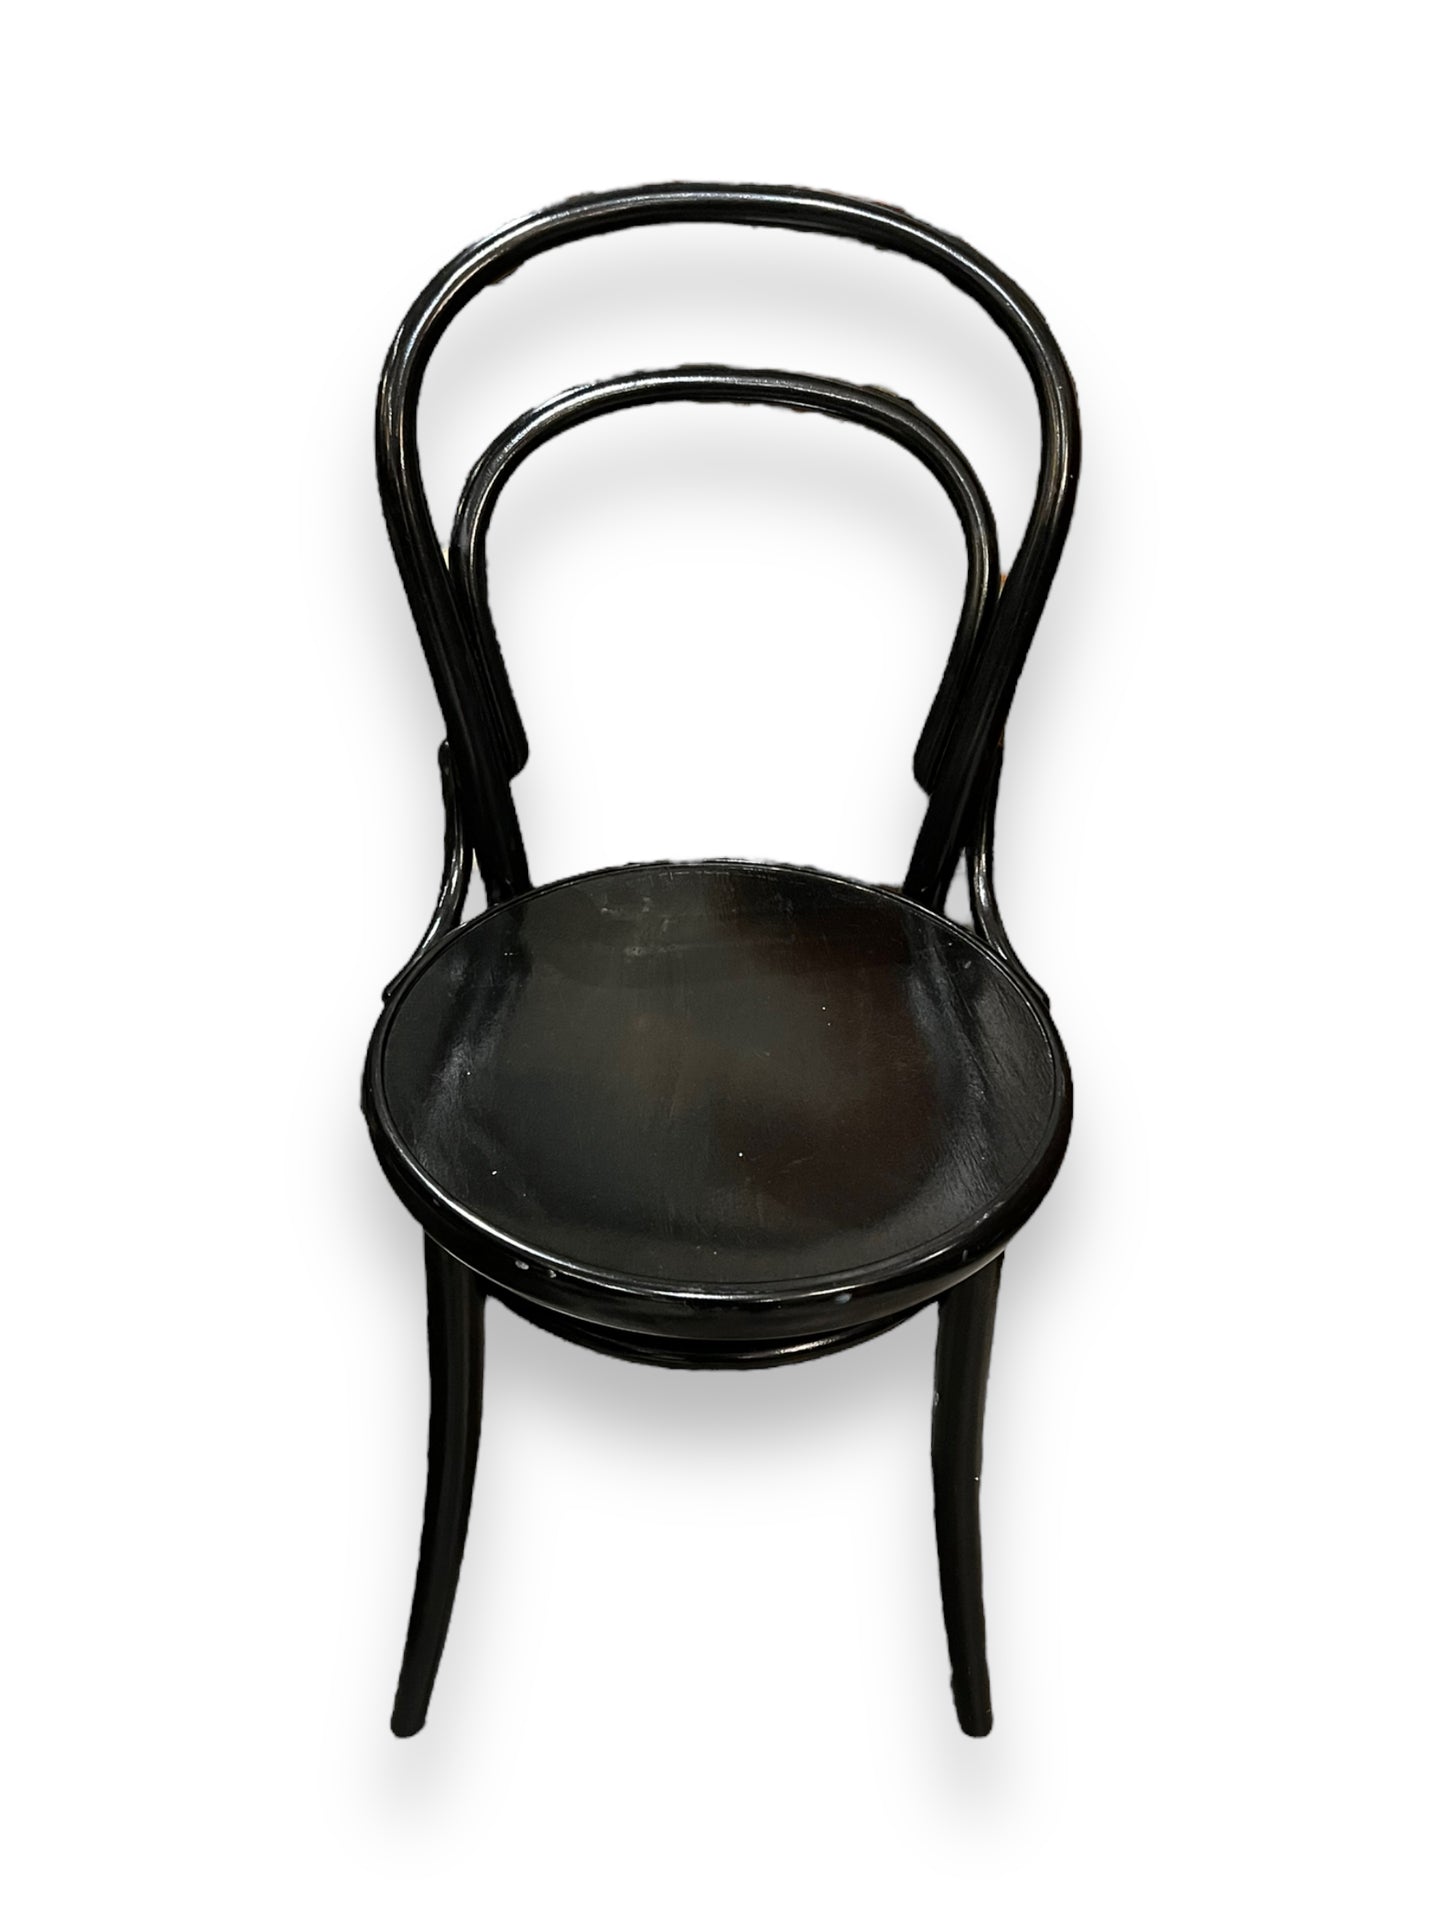 Thonet Bentwood Chairs, Black - DeFrenS